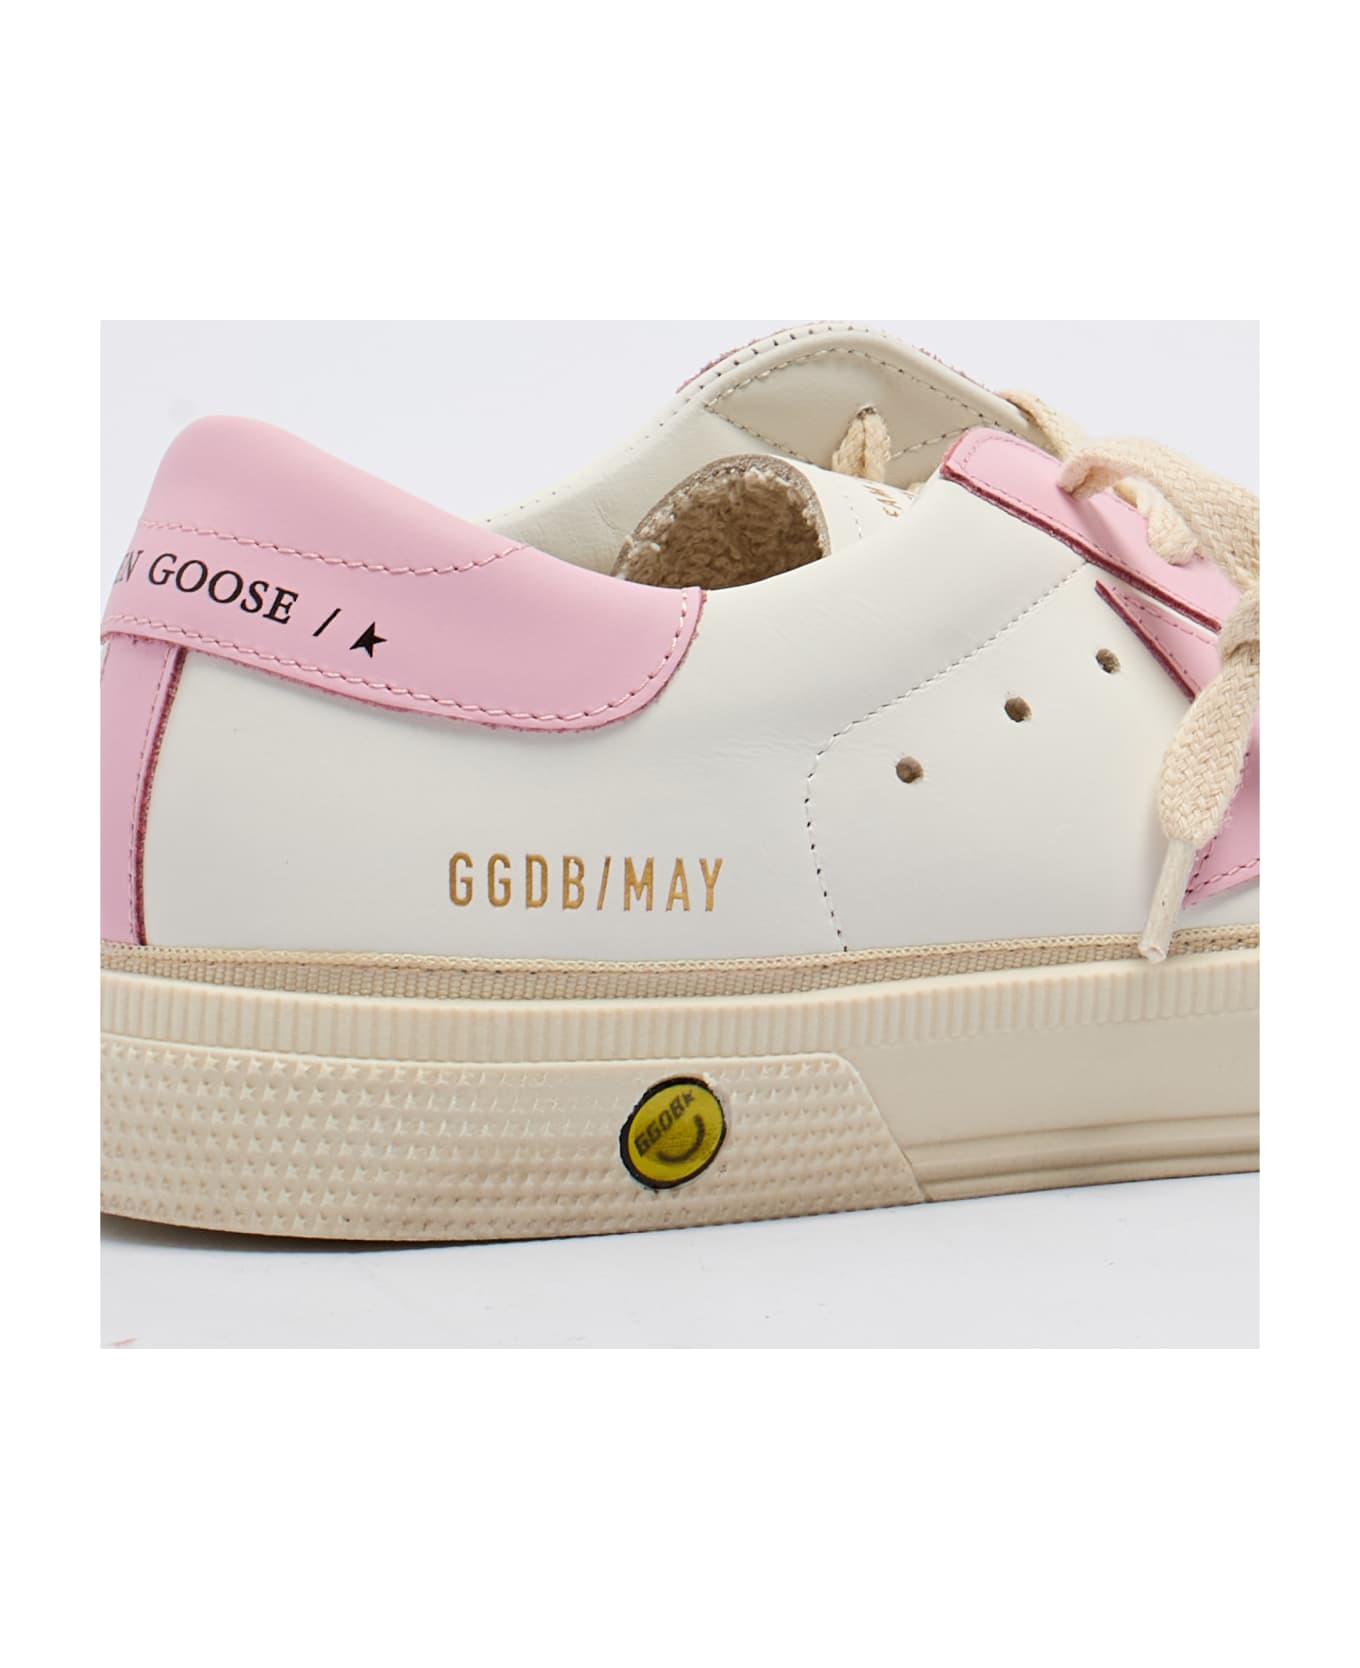 Golden Goose May Leather Sneaker - BIANCO-ROSA 